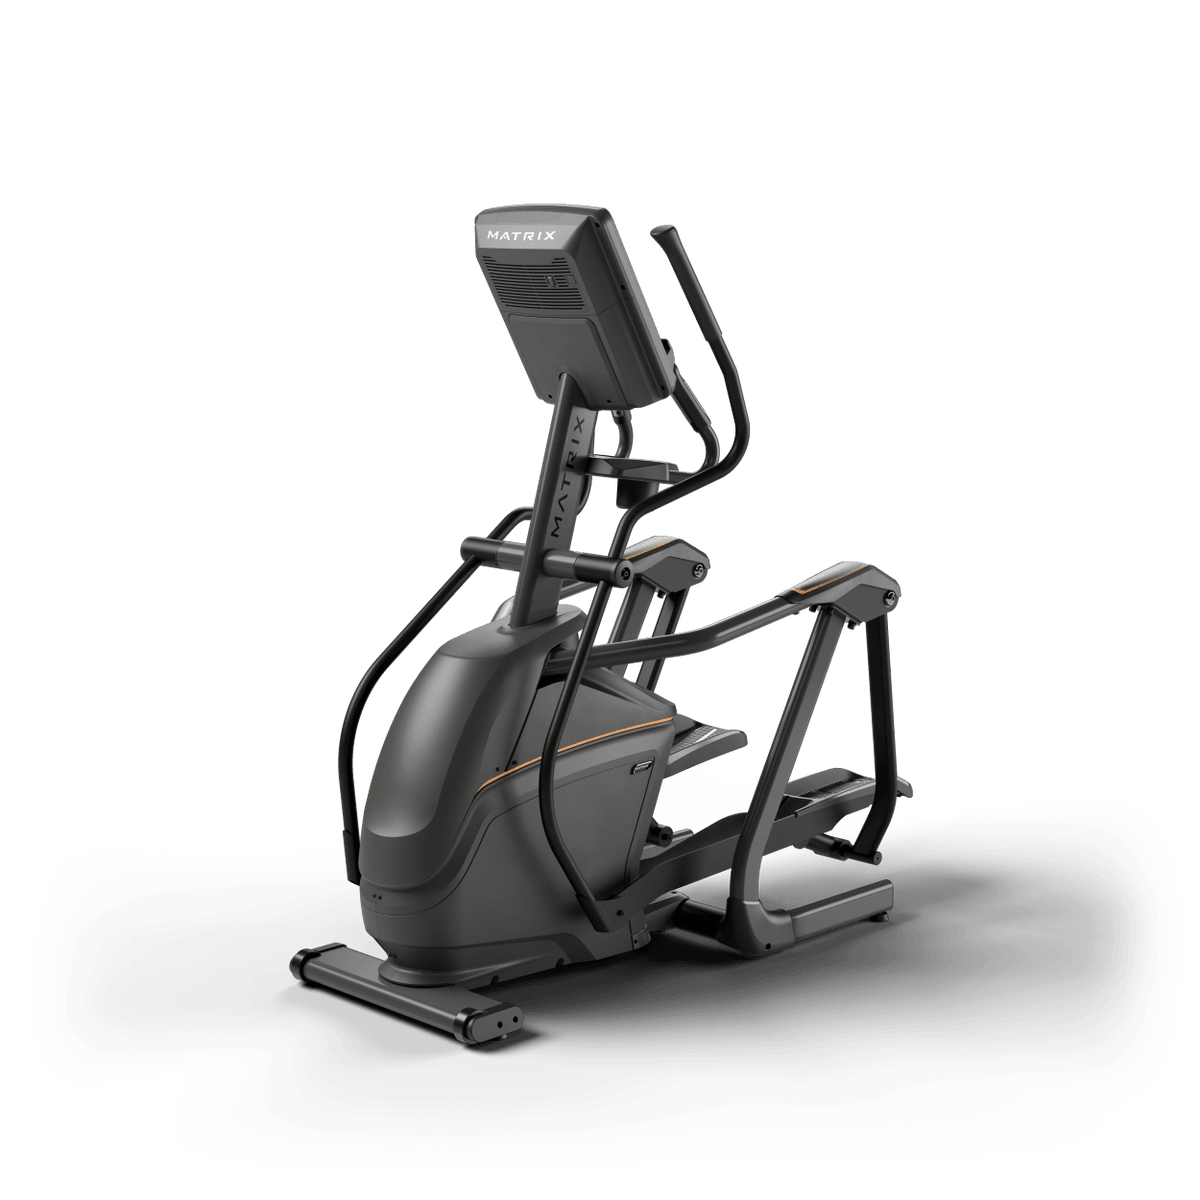 Matrix Fitness Lifestyle Elliptical with Touch Console rear view | Fitness Experience